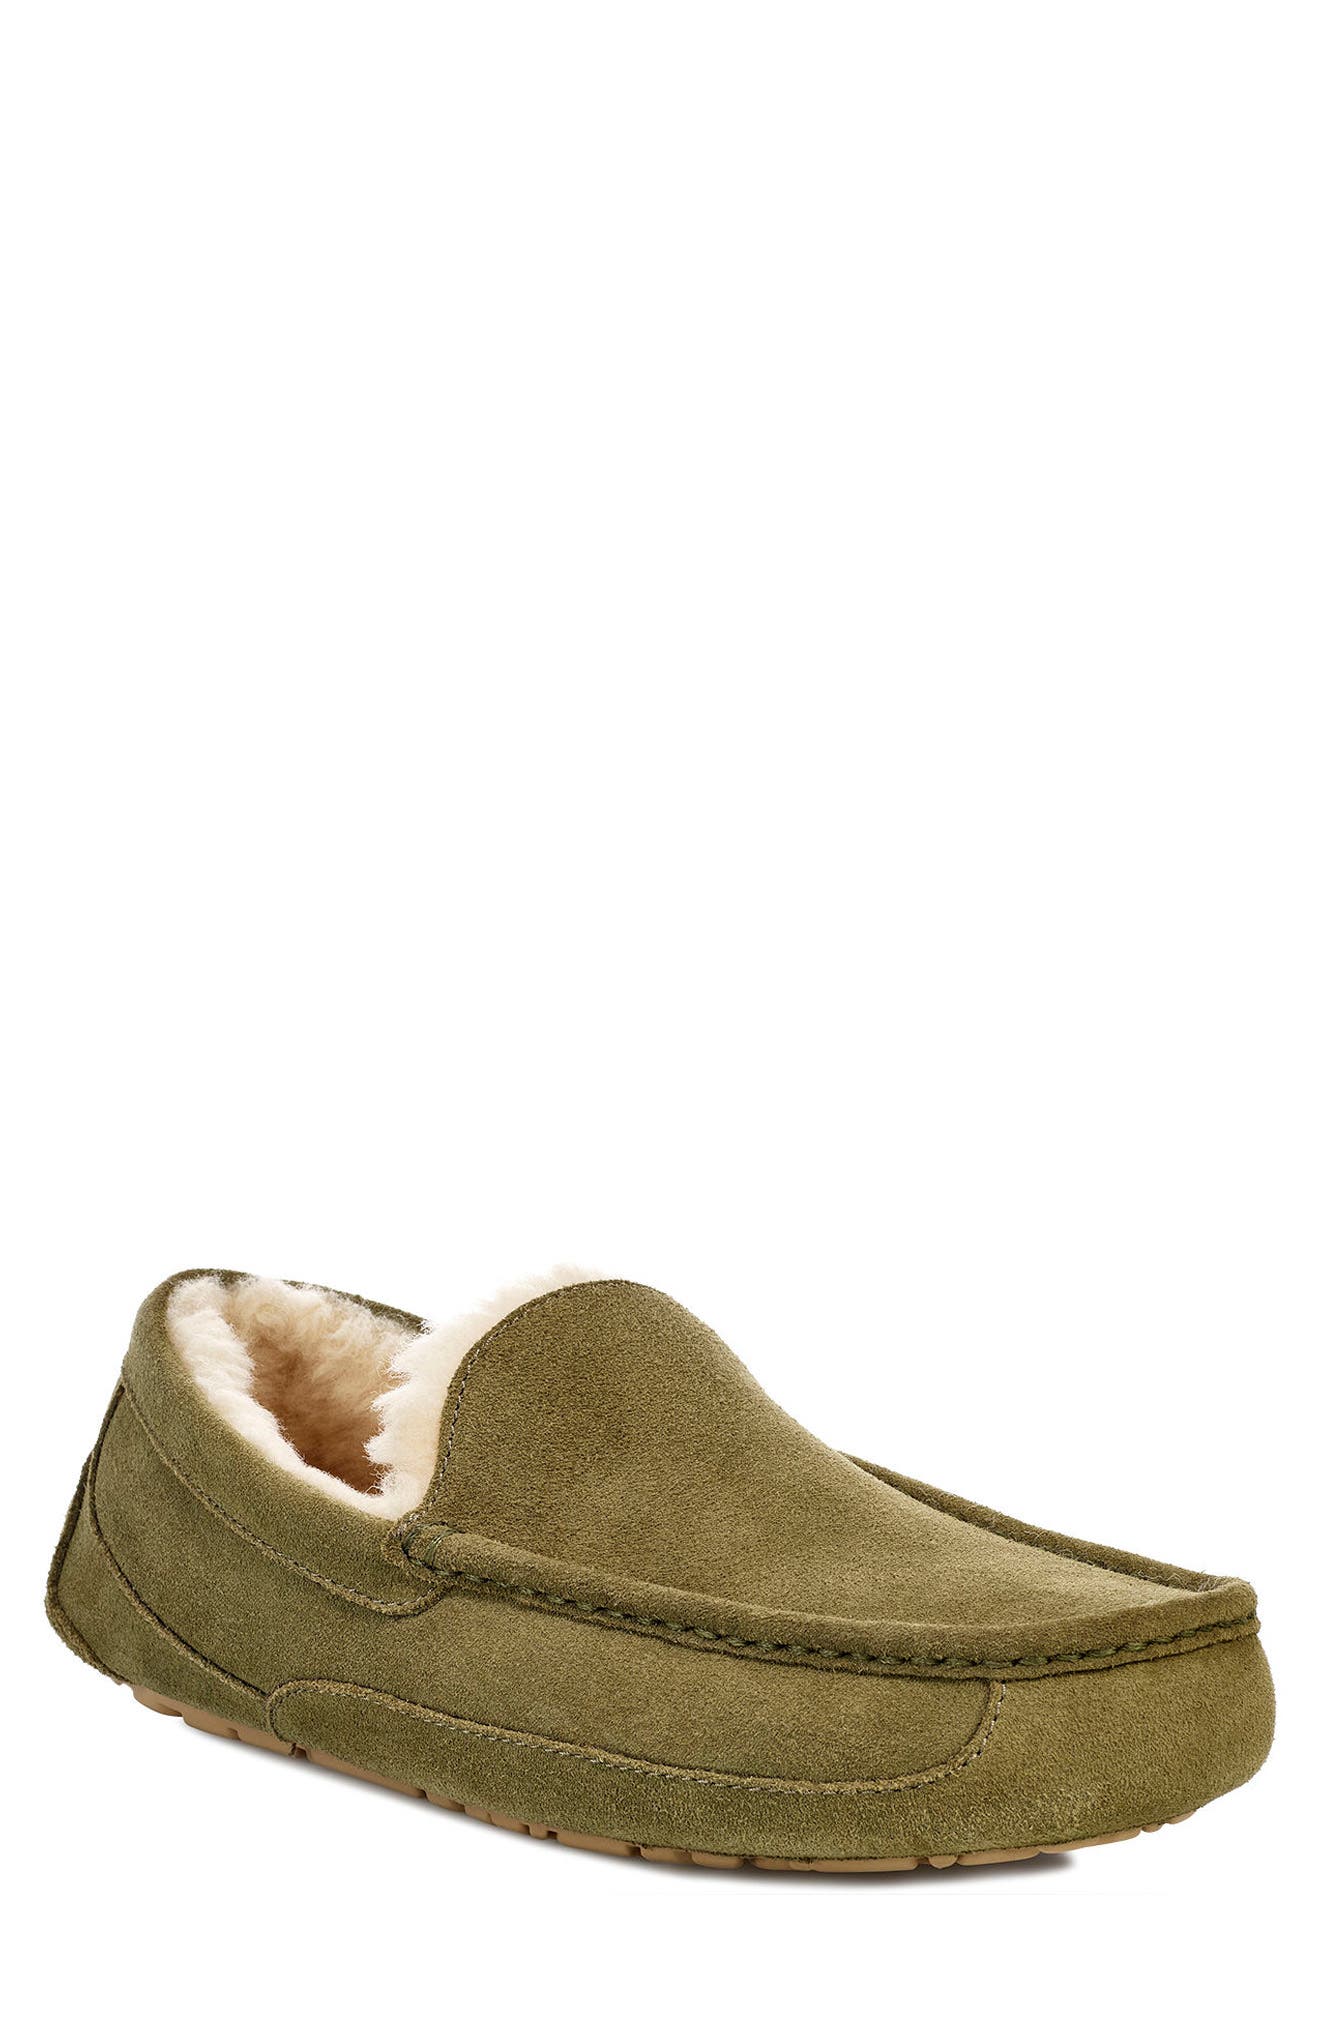 mens ugg clearance